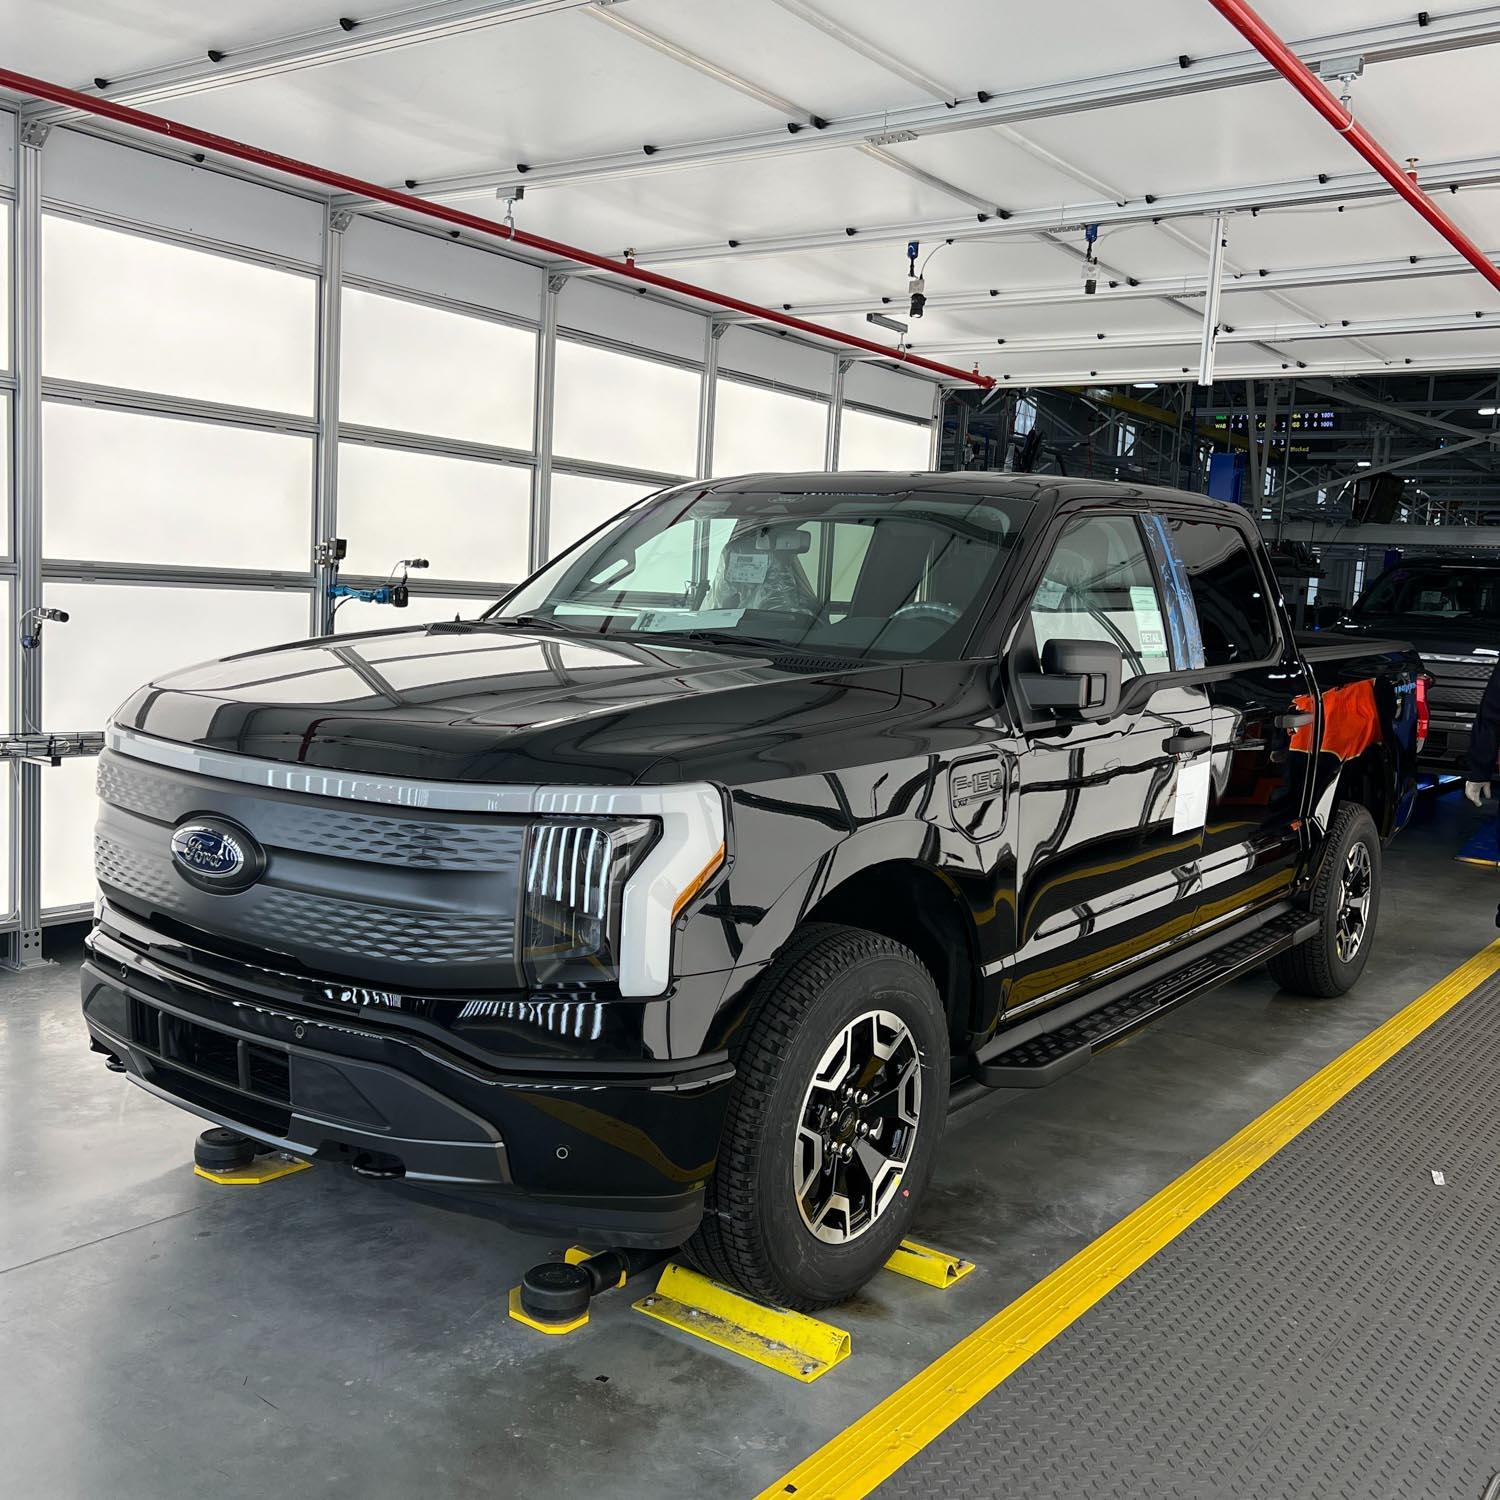 Ford F-150 Lightning Email & Photo: Your F-150 Lightning just rolled off the assembly line [post yours] image